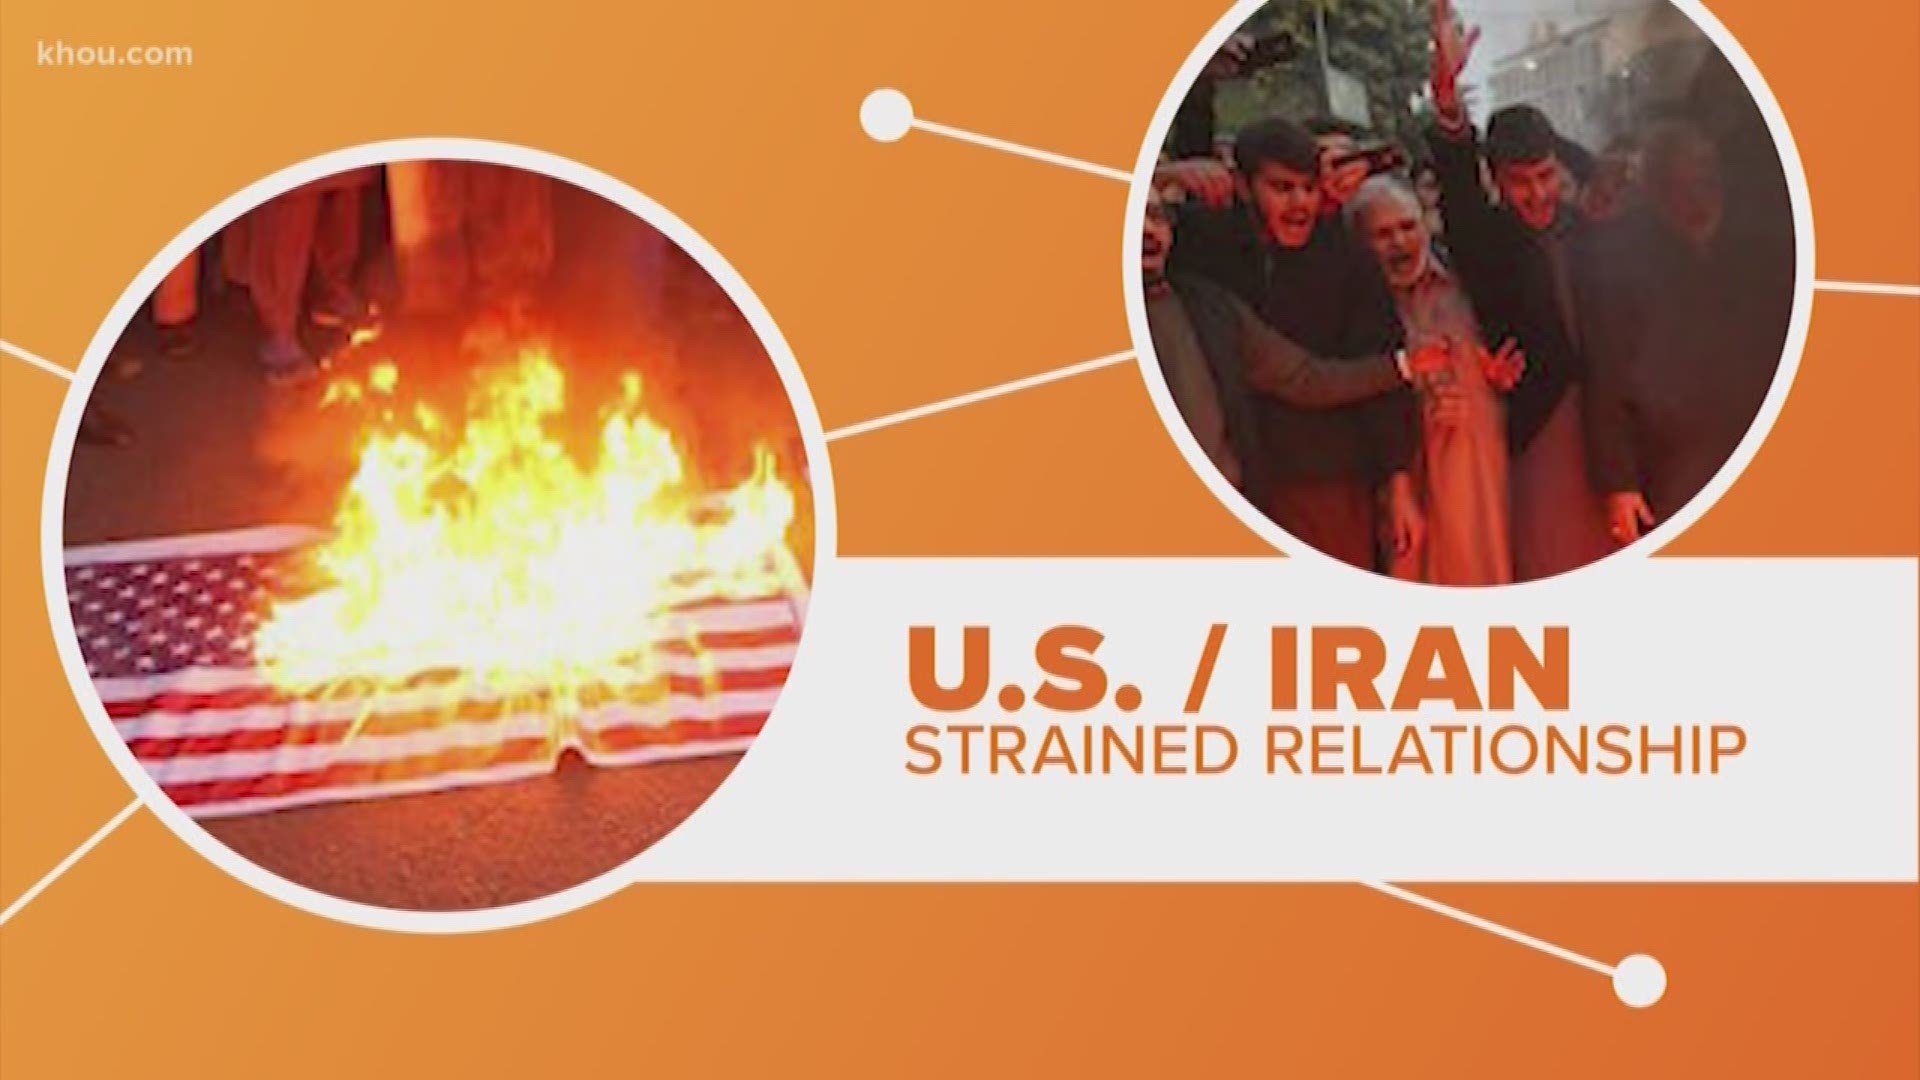 Escalating tensions between the U.S and Iran go back decades! Lauren Talarico is connecting the dots on how we got here.